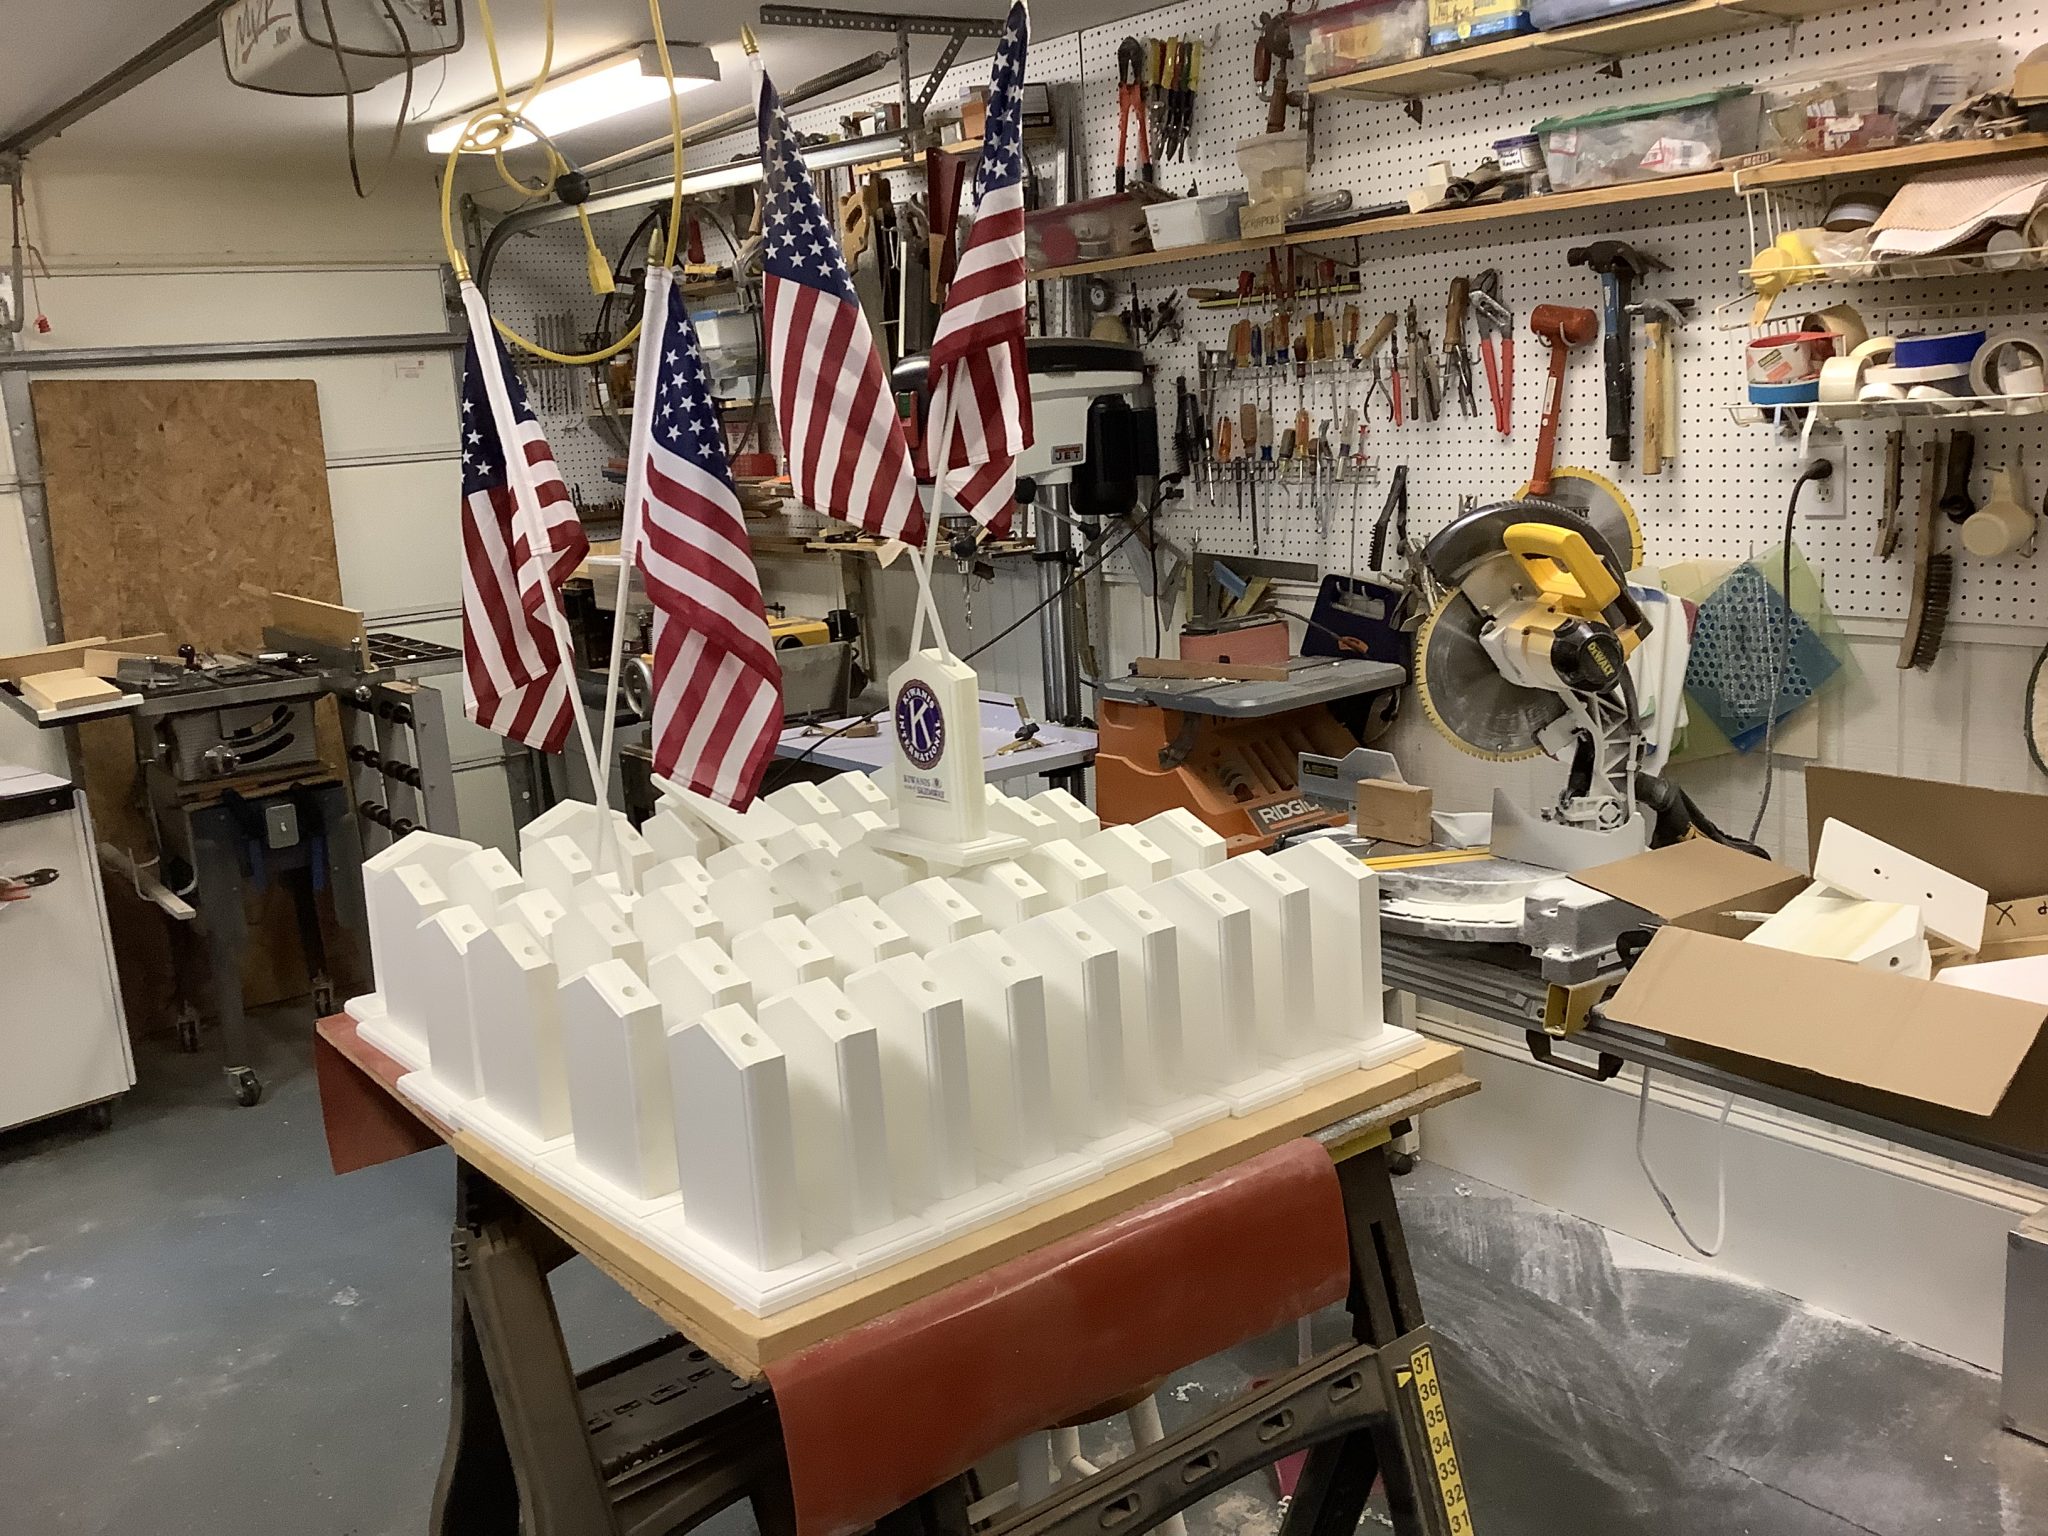 Flag bases made from PVC for Kiwanis.